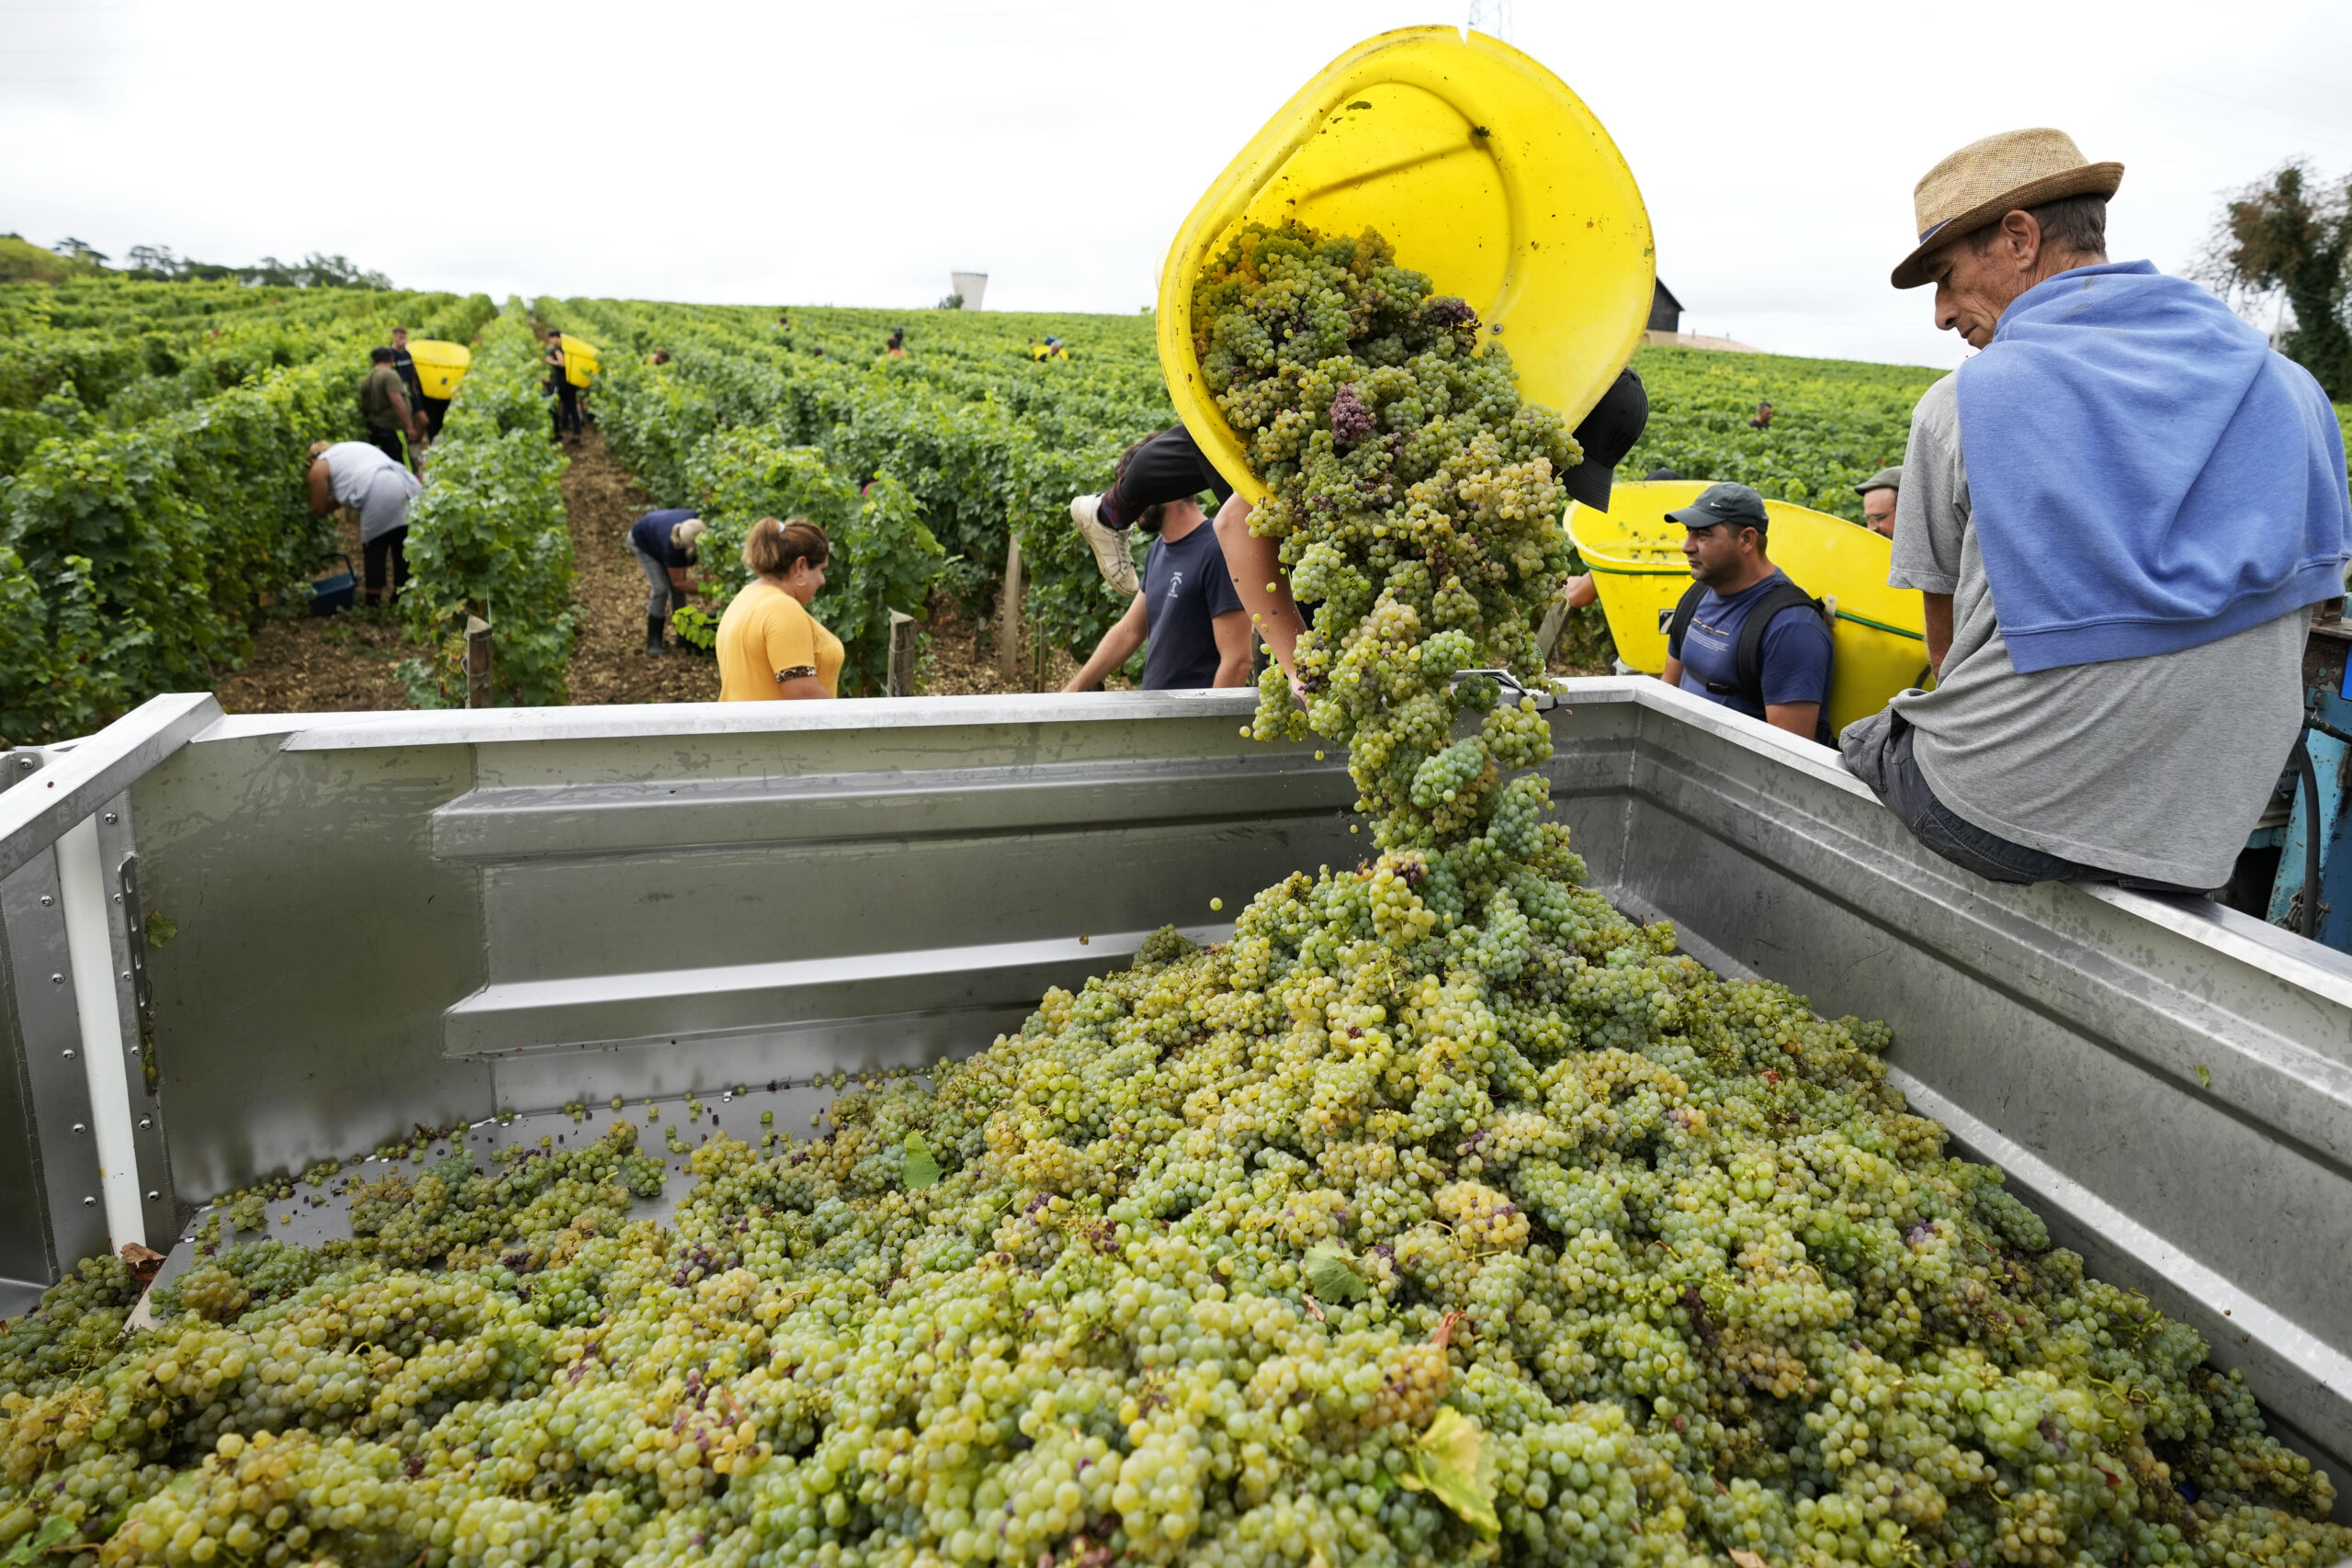 Workers collect white grapes of sauvignon in the Grand Cru Classe de Graves of the Château Carbonnieux, in Pessac Leognan, south of Bordeaux, southwestern France, Tuesday, Aug. 23, 2022. The harvest that once started in mid-September is now happening earlier than ever in one of France’s most celebrated wine regions and other parts of Europe due to drought and climate change. (AP Photo/Francois Mori)